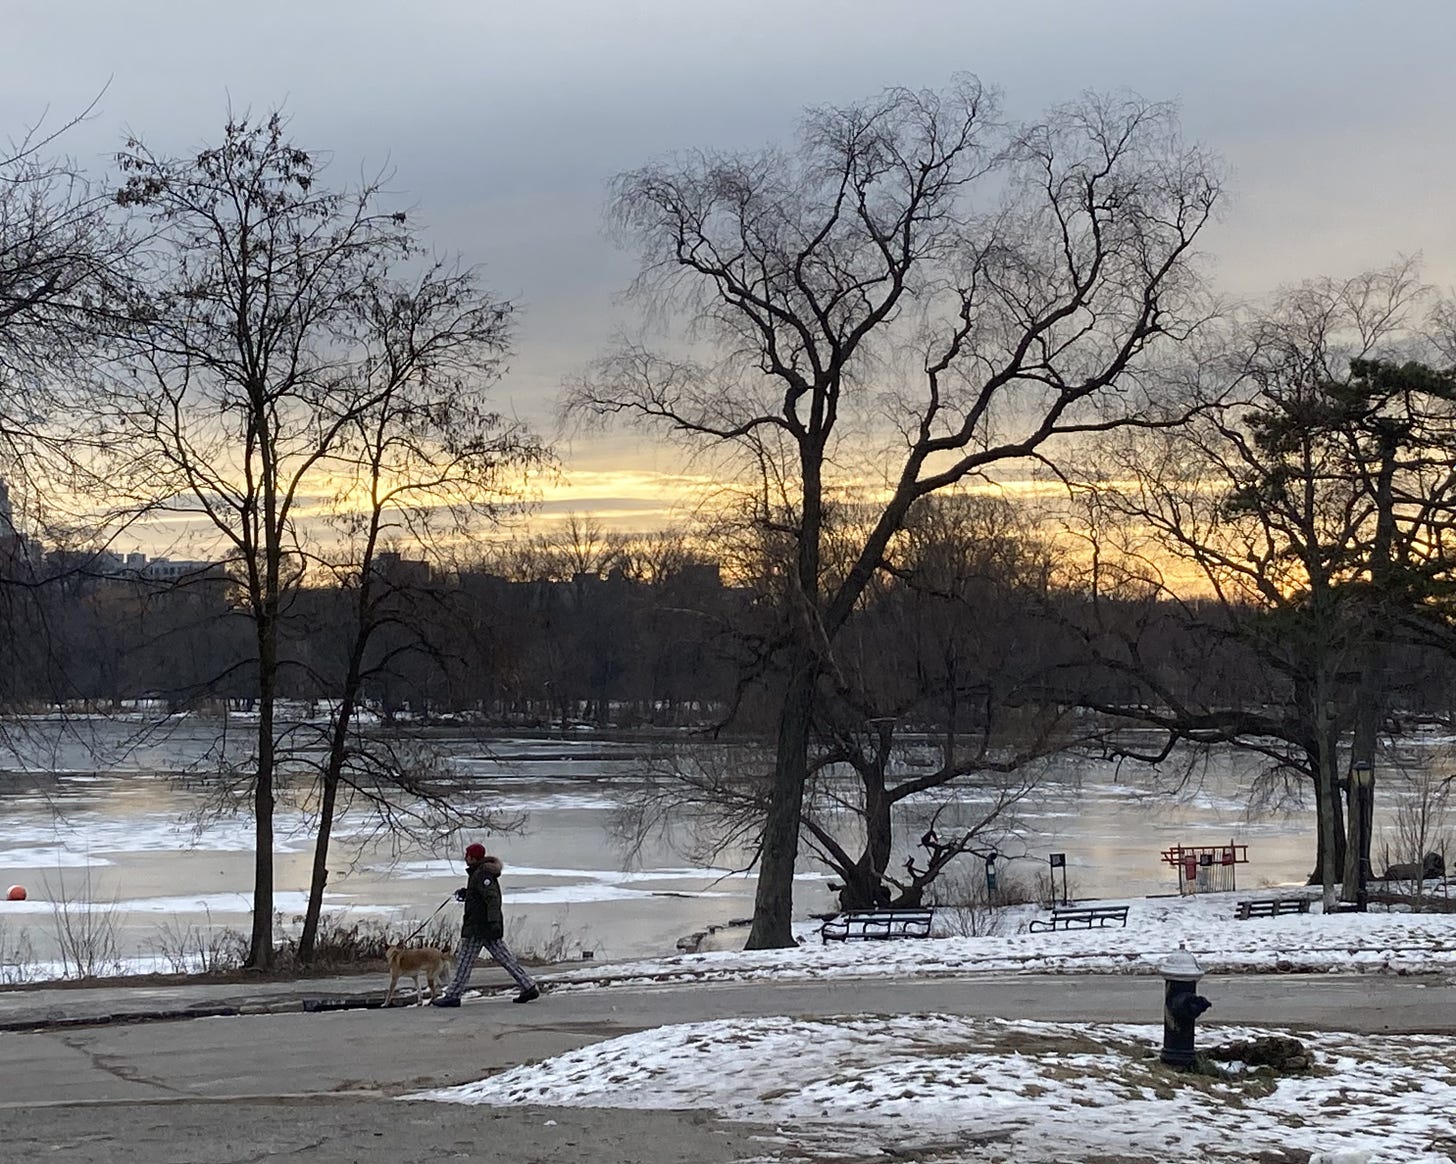 park view with bare trees, a frozen lake, and cloudy sky with golden light along the horizon